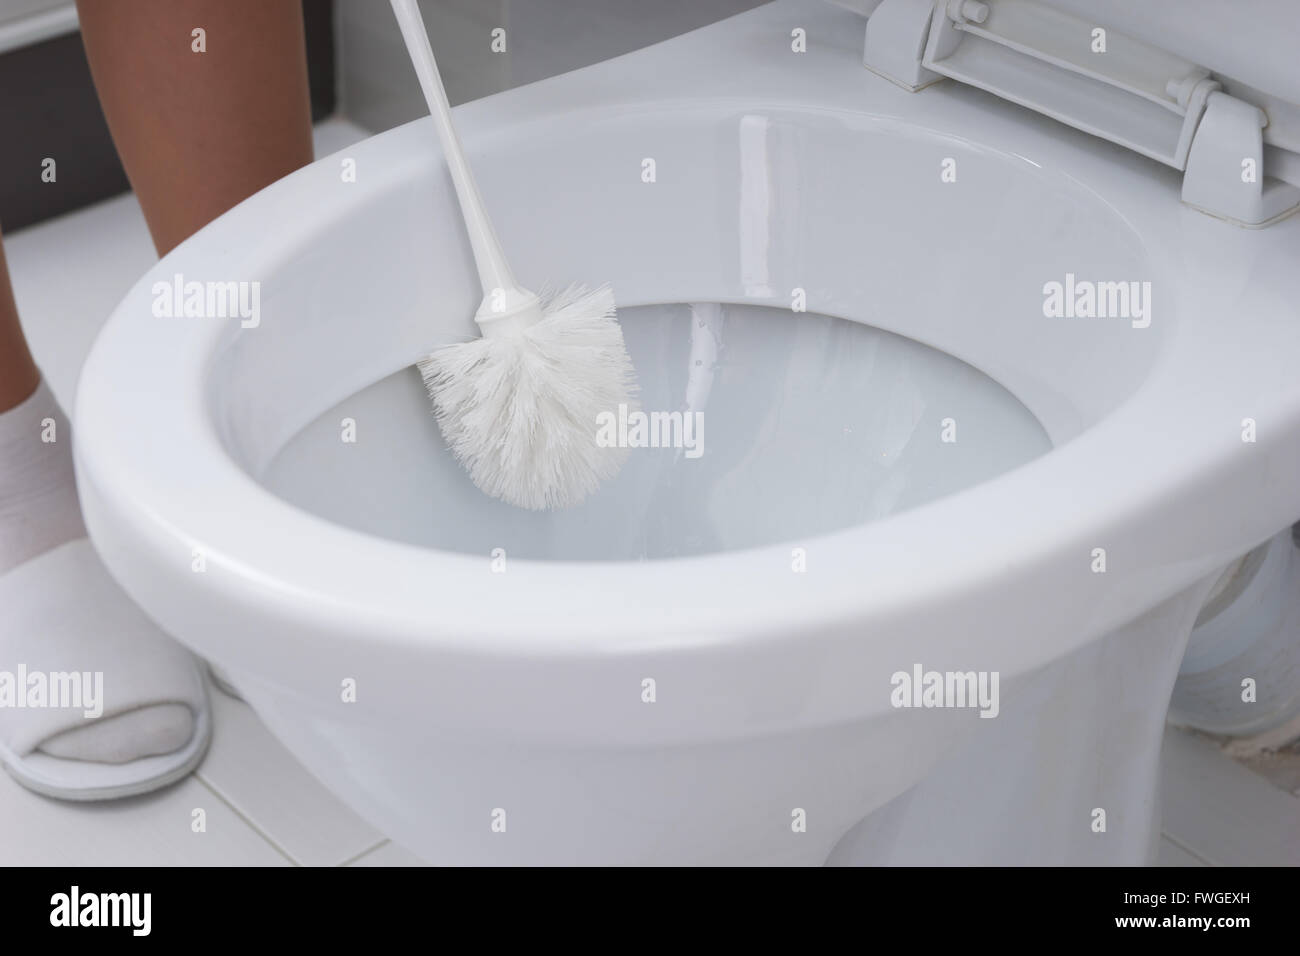 Woman cleaning a toilet bowl with a brush in a close up view conceptual of household hygiene and cleanliness Stock Photo